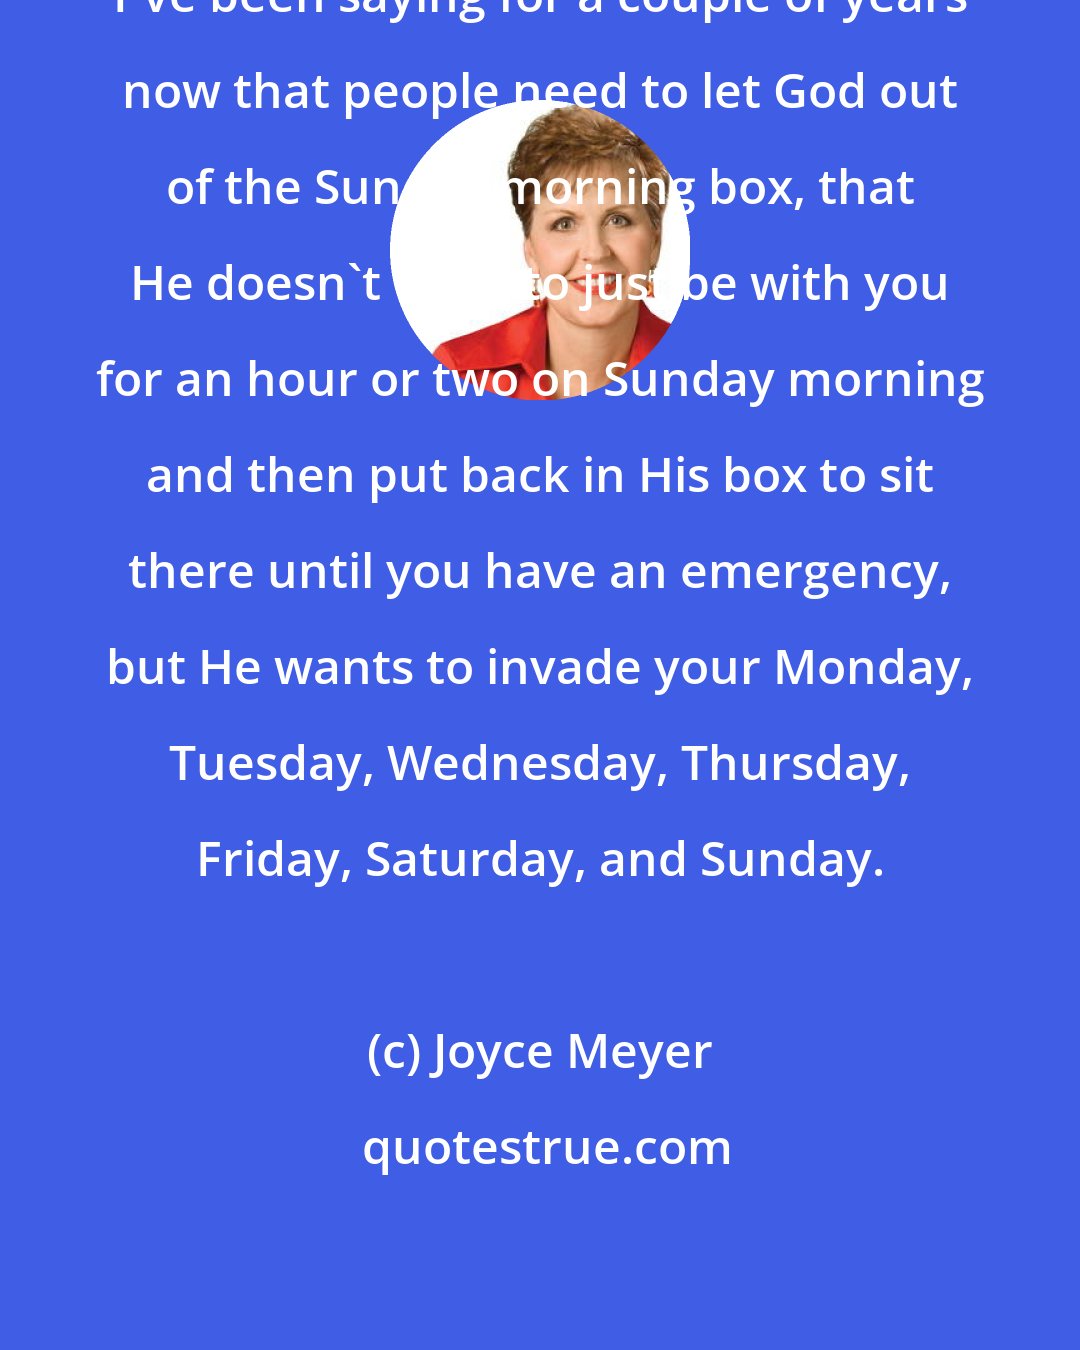 Joyce Meyer: I've been saying for a couple of years now that people need to let God out of the Sunday morning box, that He doesn't want to just be with you for an hour or two on Sunday morning and then put back in His box to sit there until you have an emergency, but He wants to invade your Monday, Tuesday, Wednesday, Thursday, Friday, Saturday, and Sunday.